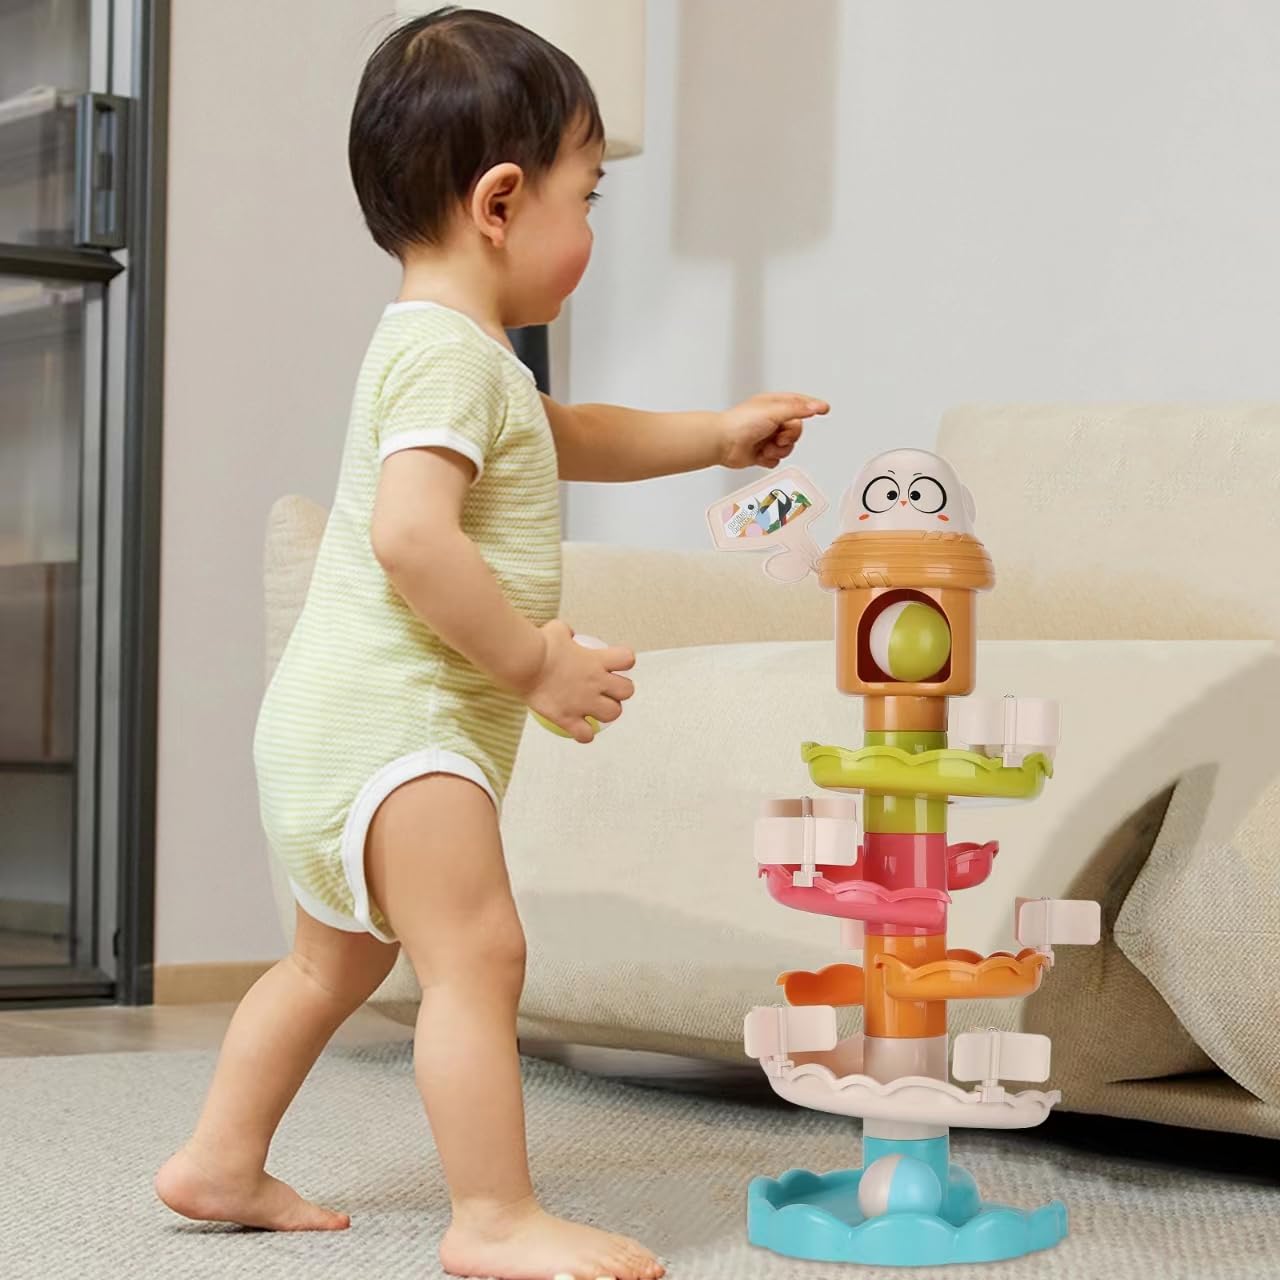 Track Ball, Ball Drop and Roll Tower, Educational Development Toys for 2, 3, 4 Years Old Boys, Girls, Toddler Activities